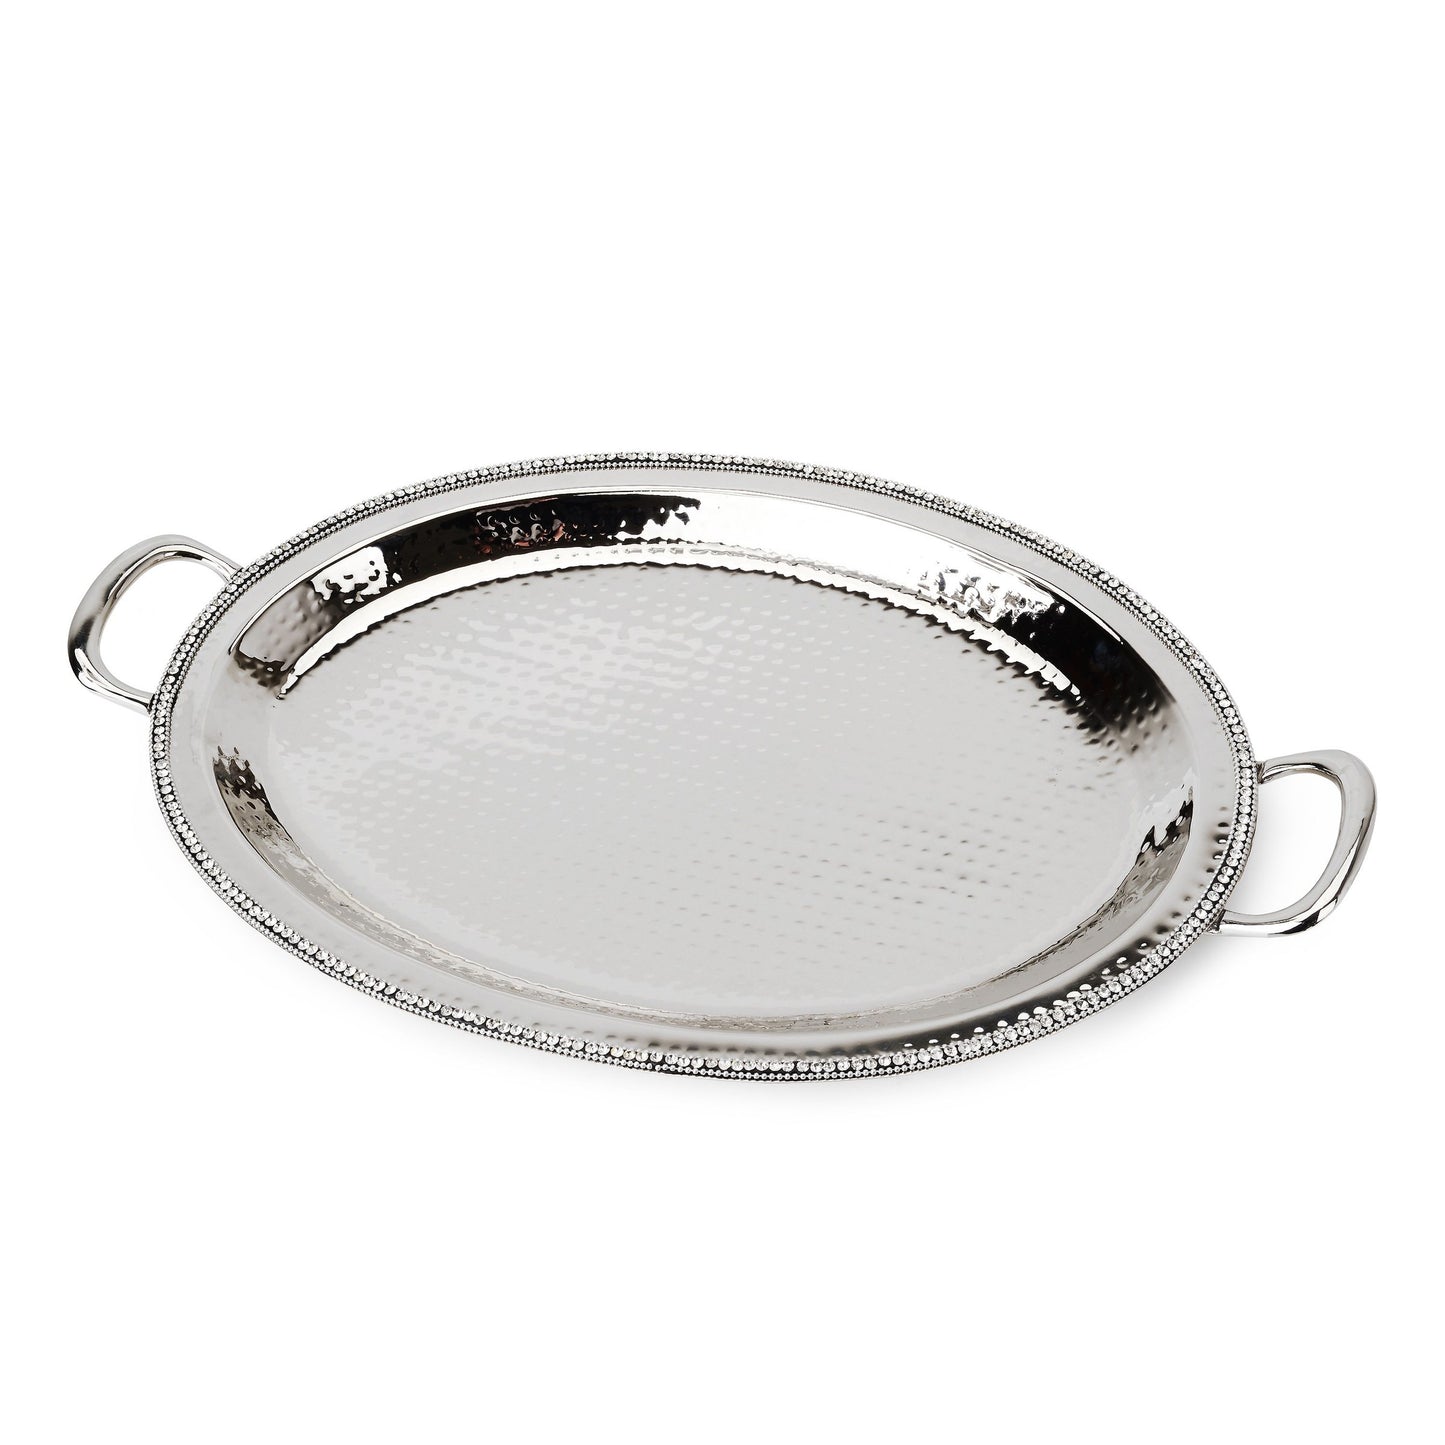 Classic Touch Decor Stainless Steel Oval Tray w Diamonds, Silver, 21" x 14"